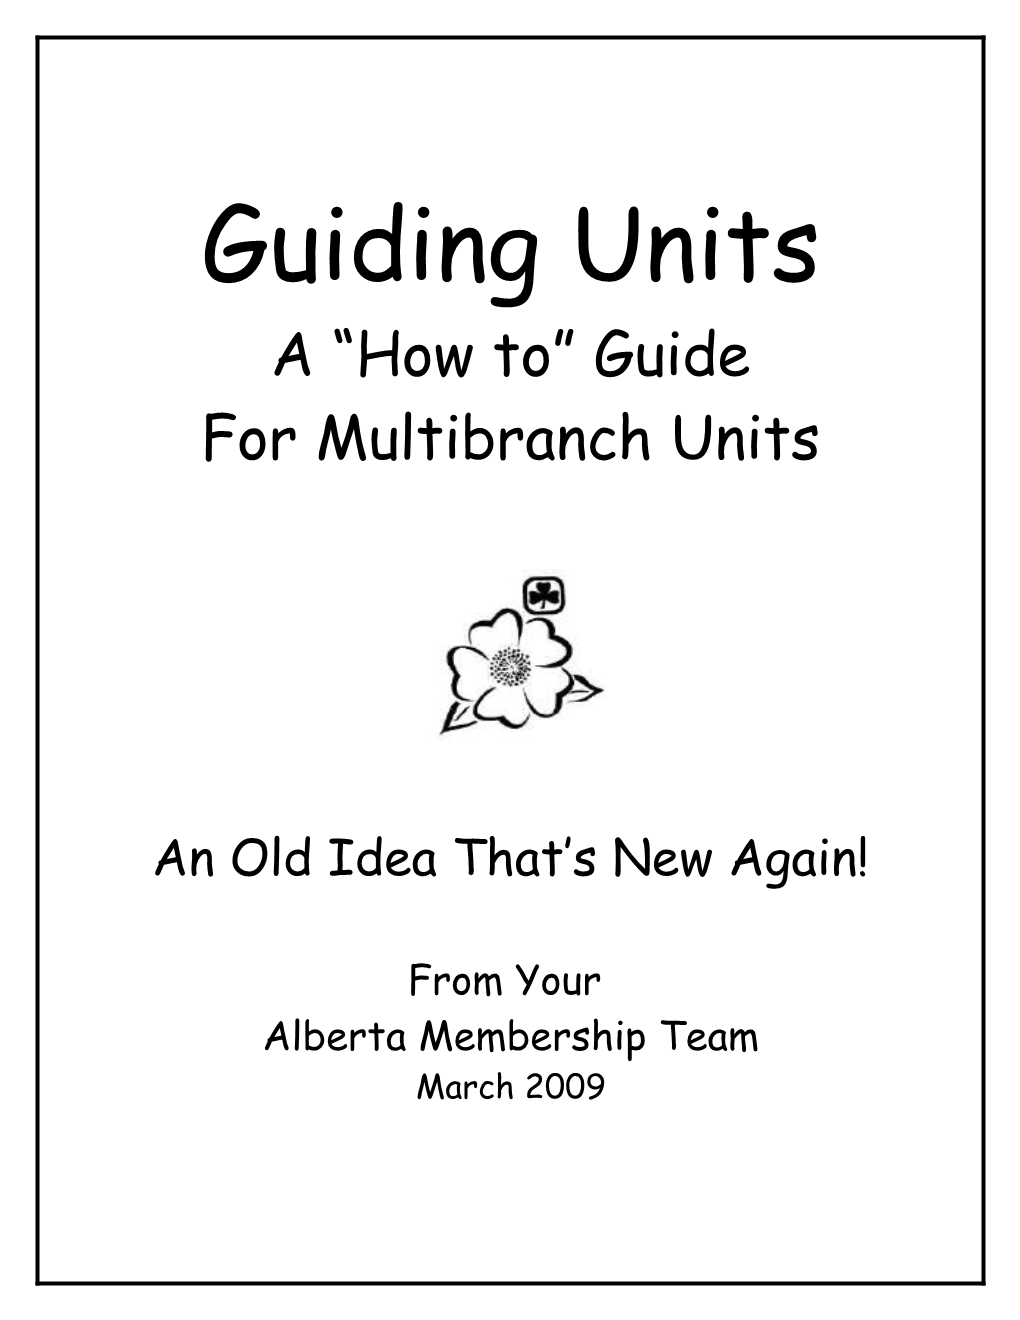 Starting a Guiding Unit